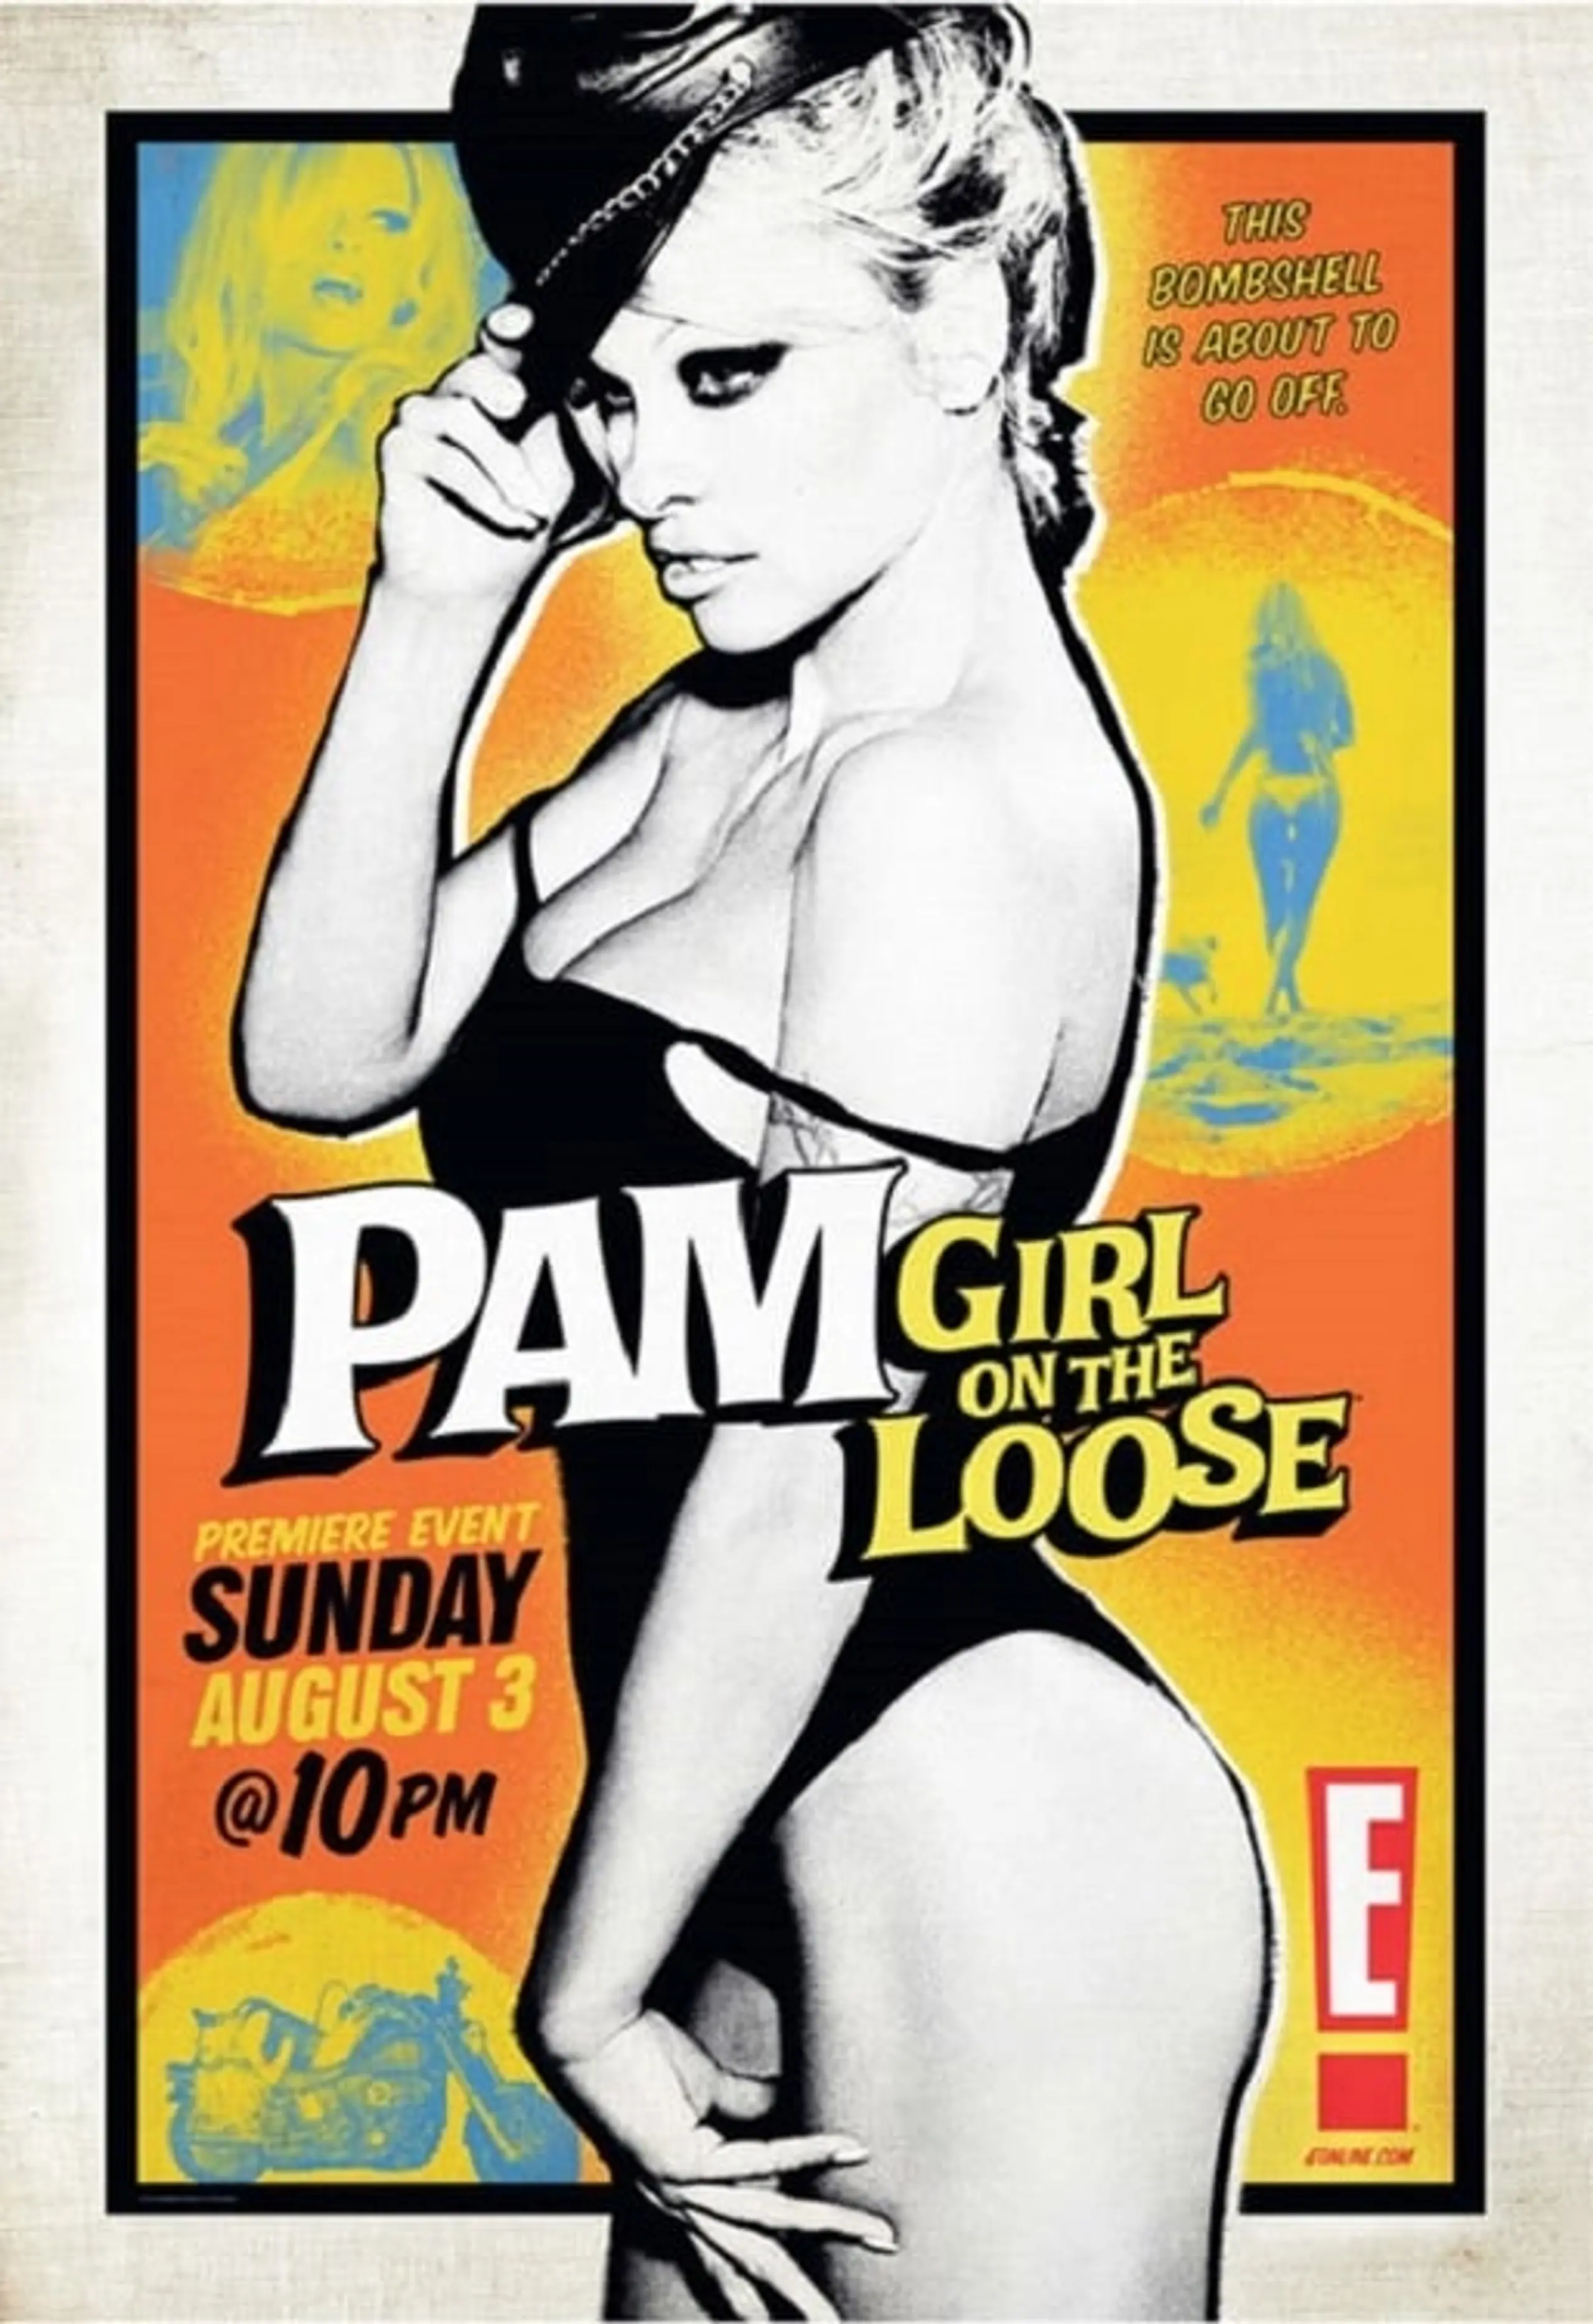 E!'s Pam: Girl on the Loose!